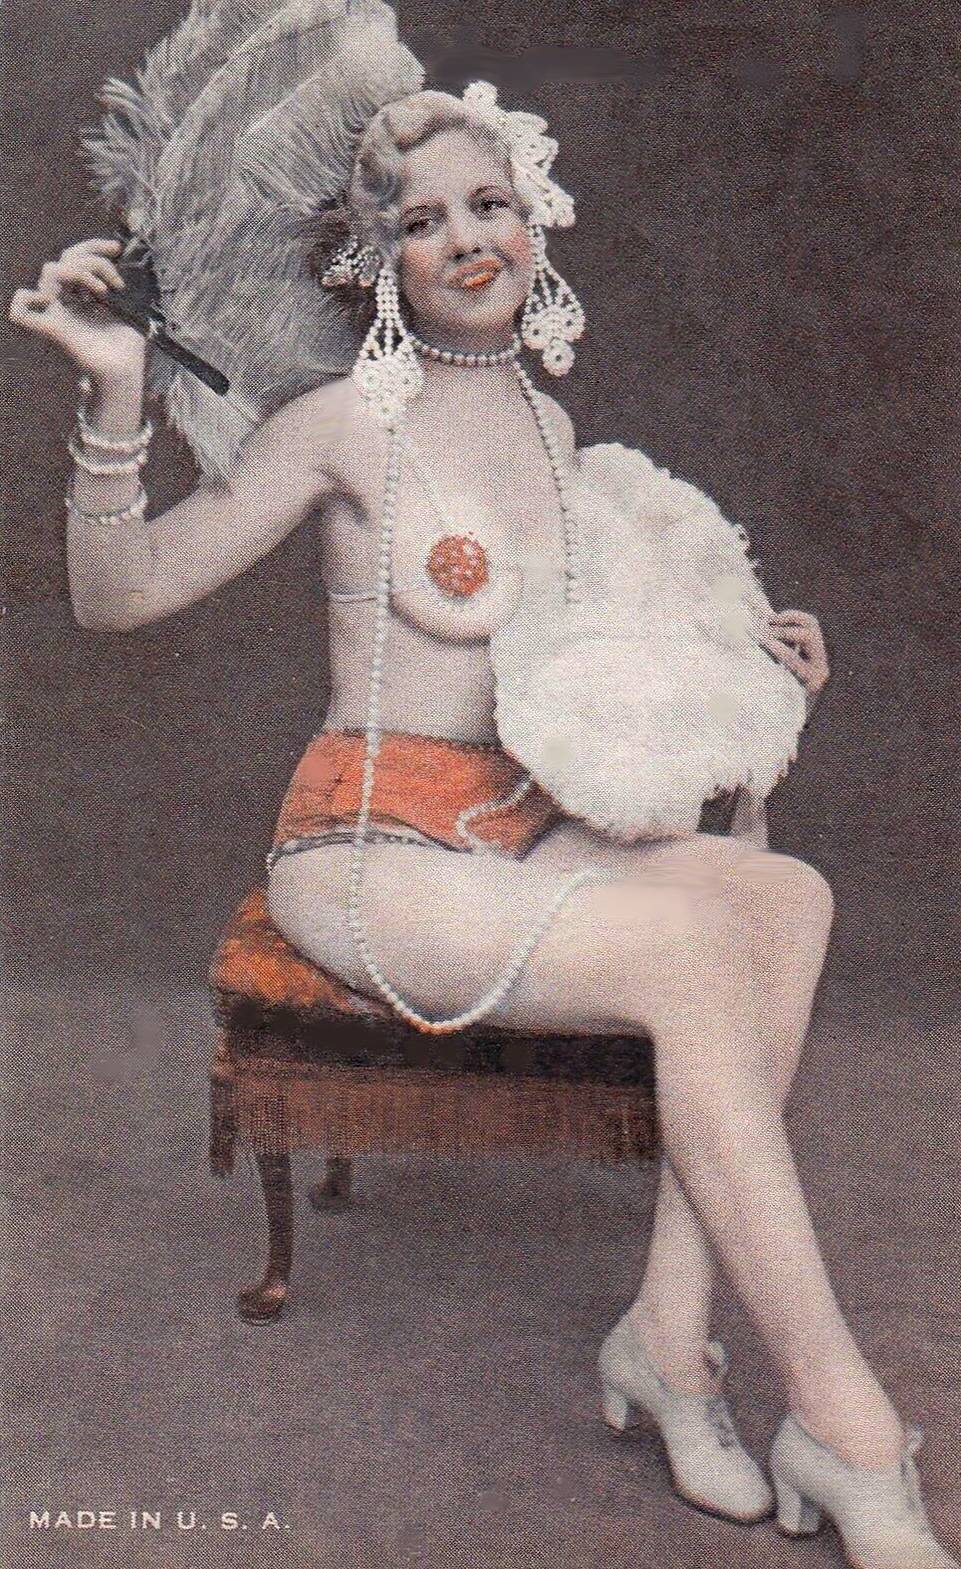 ARCADE CARD - EXHIBIT SUPPLY COMPANY - WOMEN IN TWO PIECE SMALL OUTFIT AND BIG FEATHERED HEADDRESS AND STRANDS OF PEARLS SITTING ON A CHAIR SMILING AT CAMERA - TINTED - 1920s